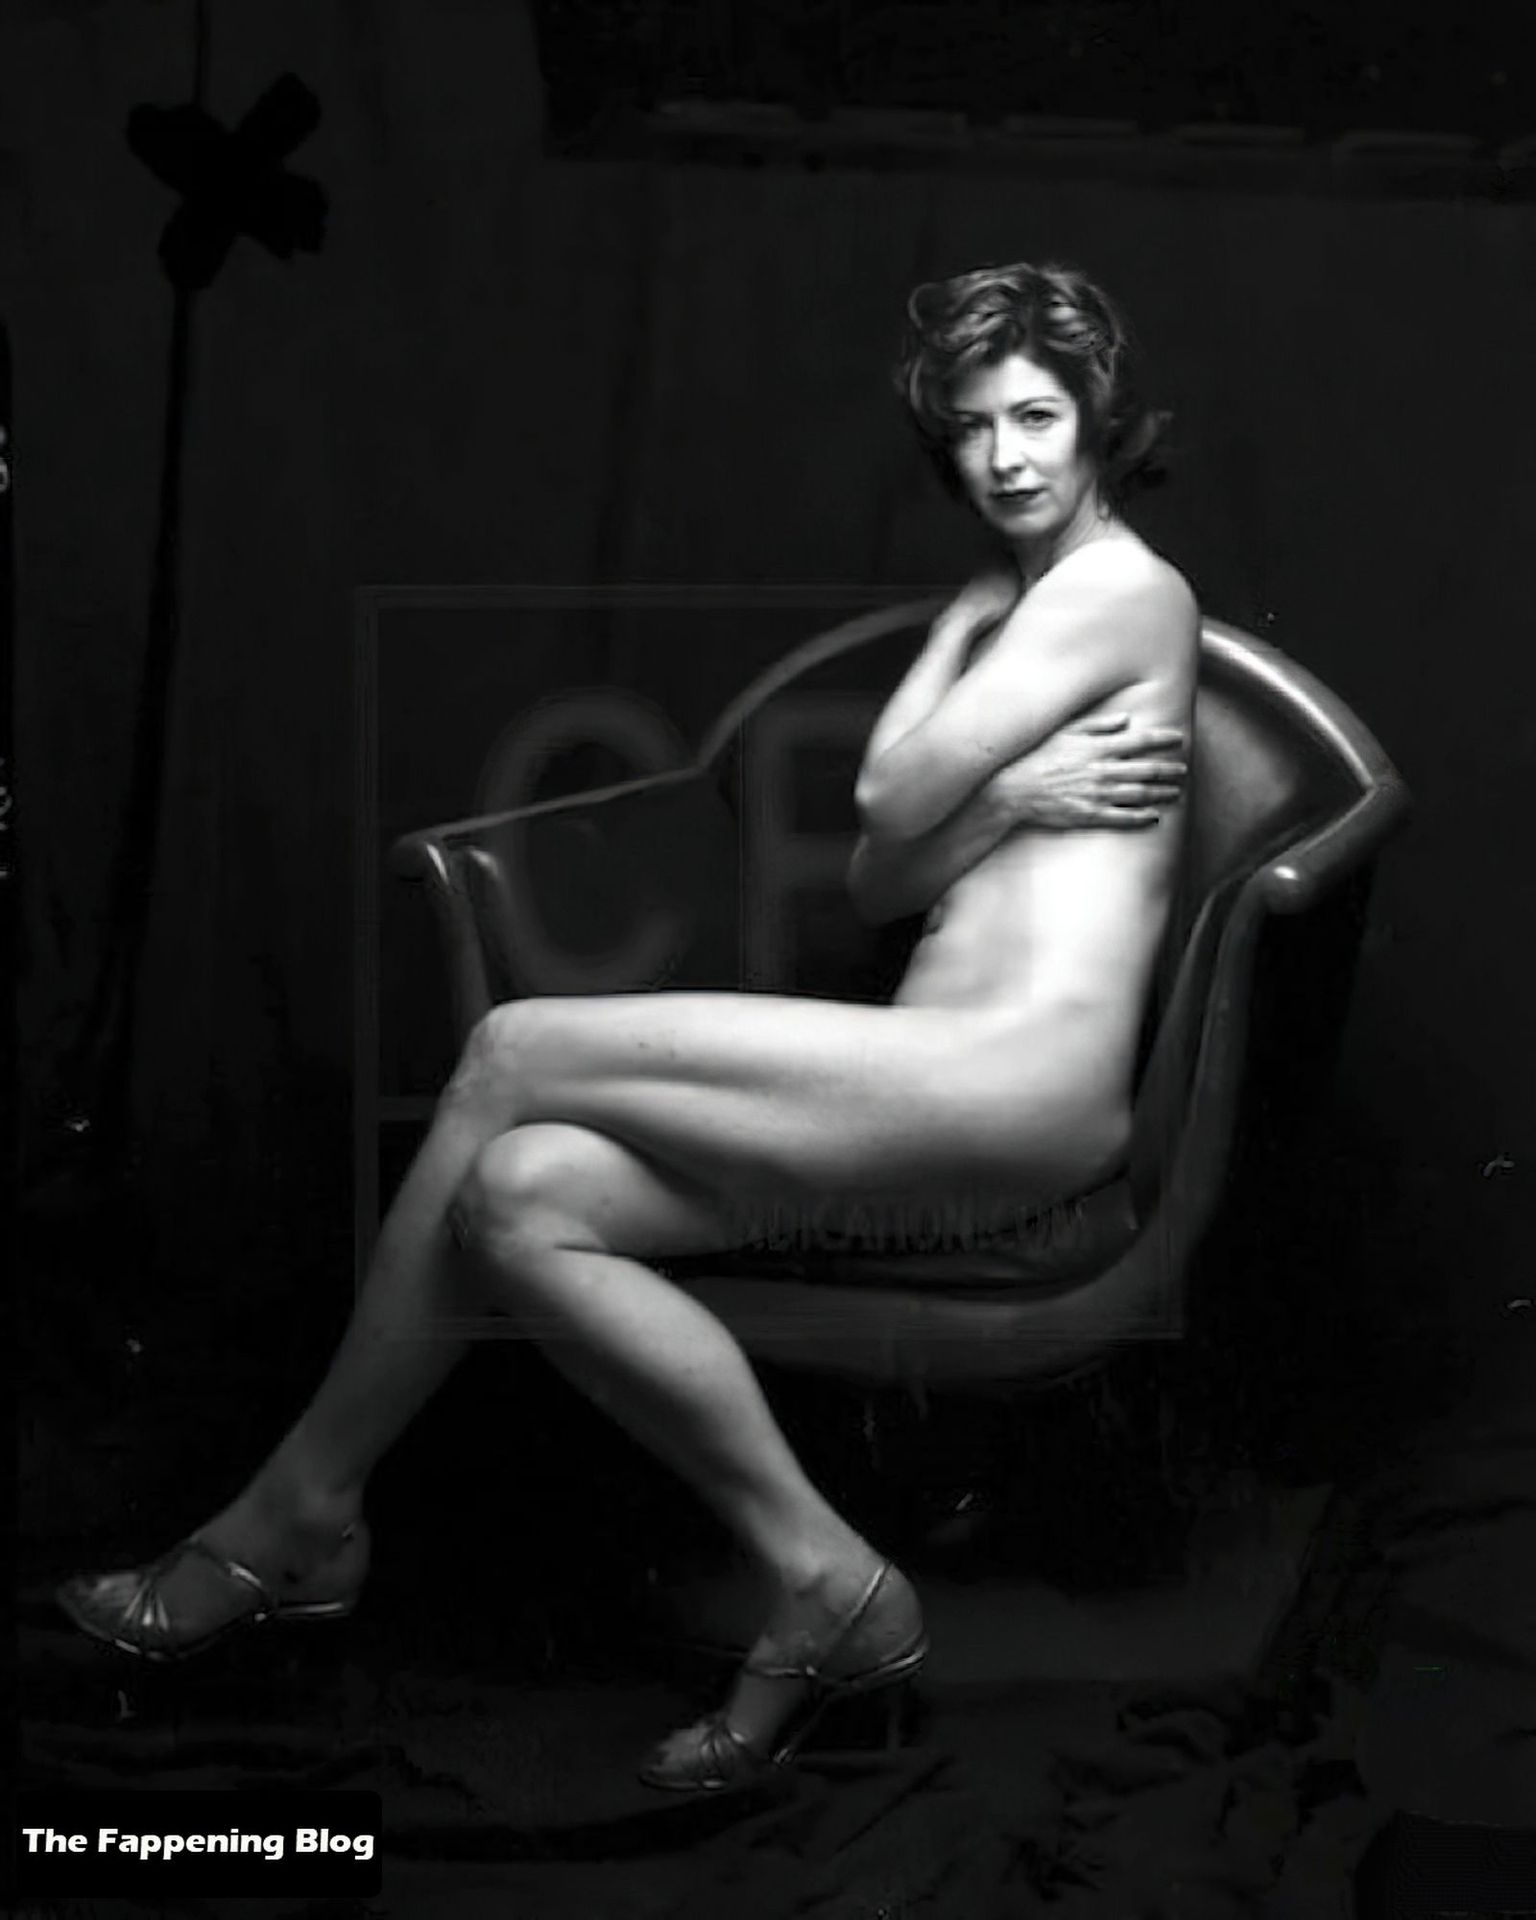 Dana-Delany-Nude-Collection-2-thefappeningblog.com_.jpg